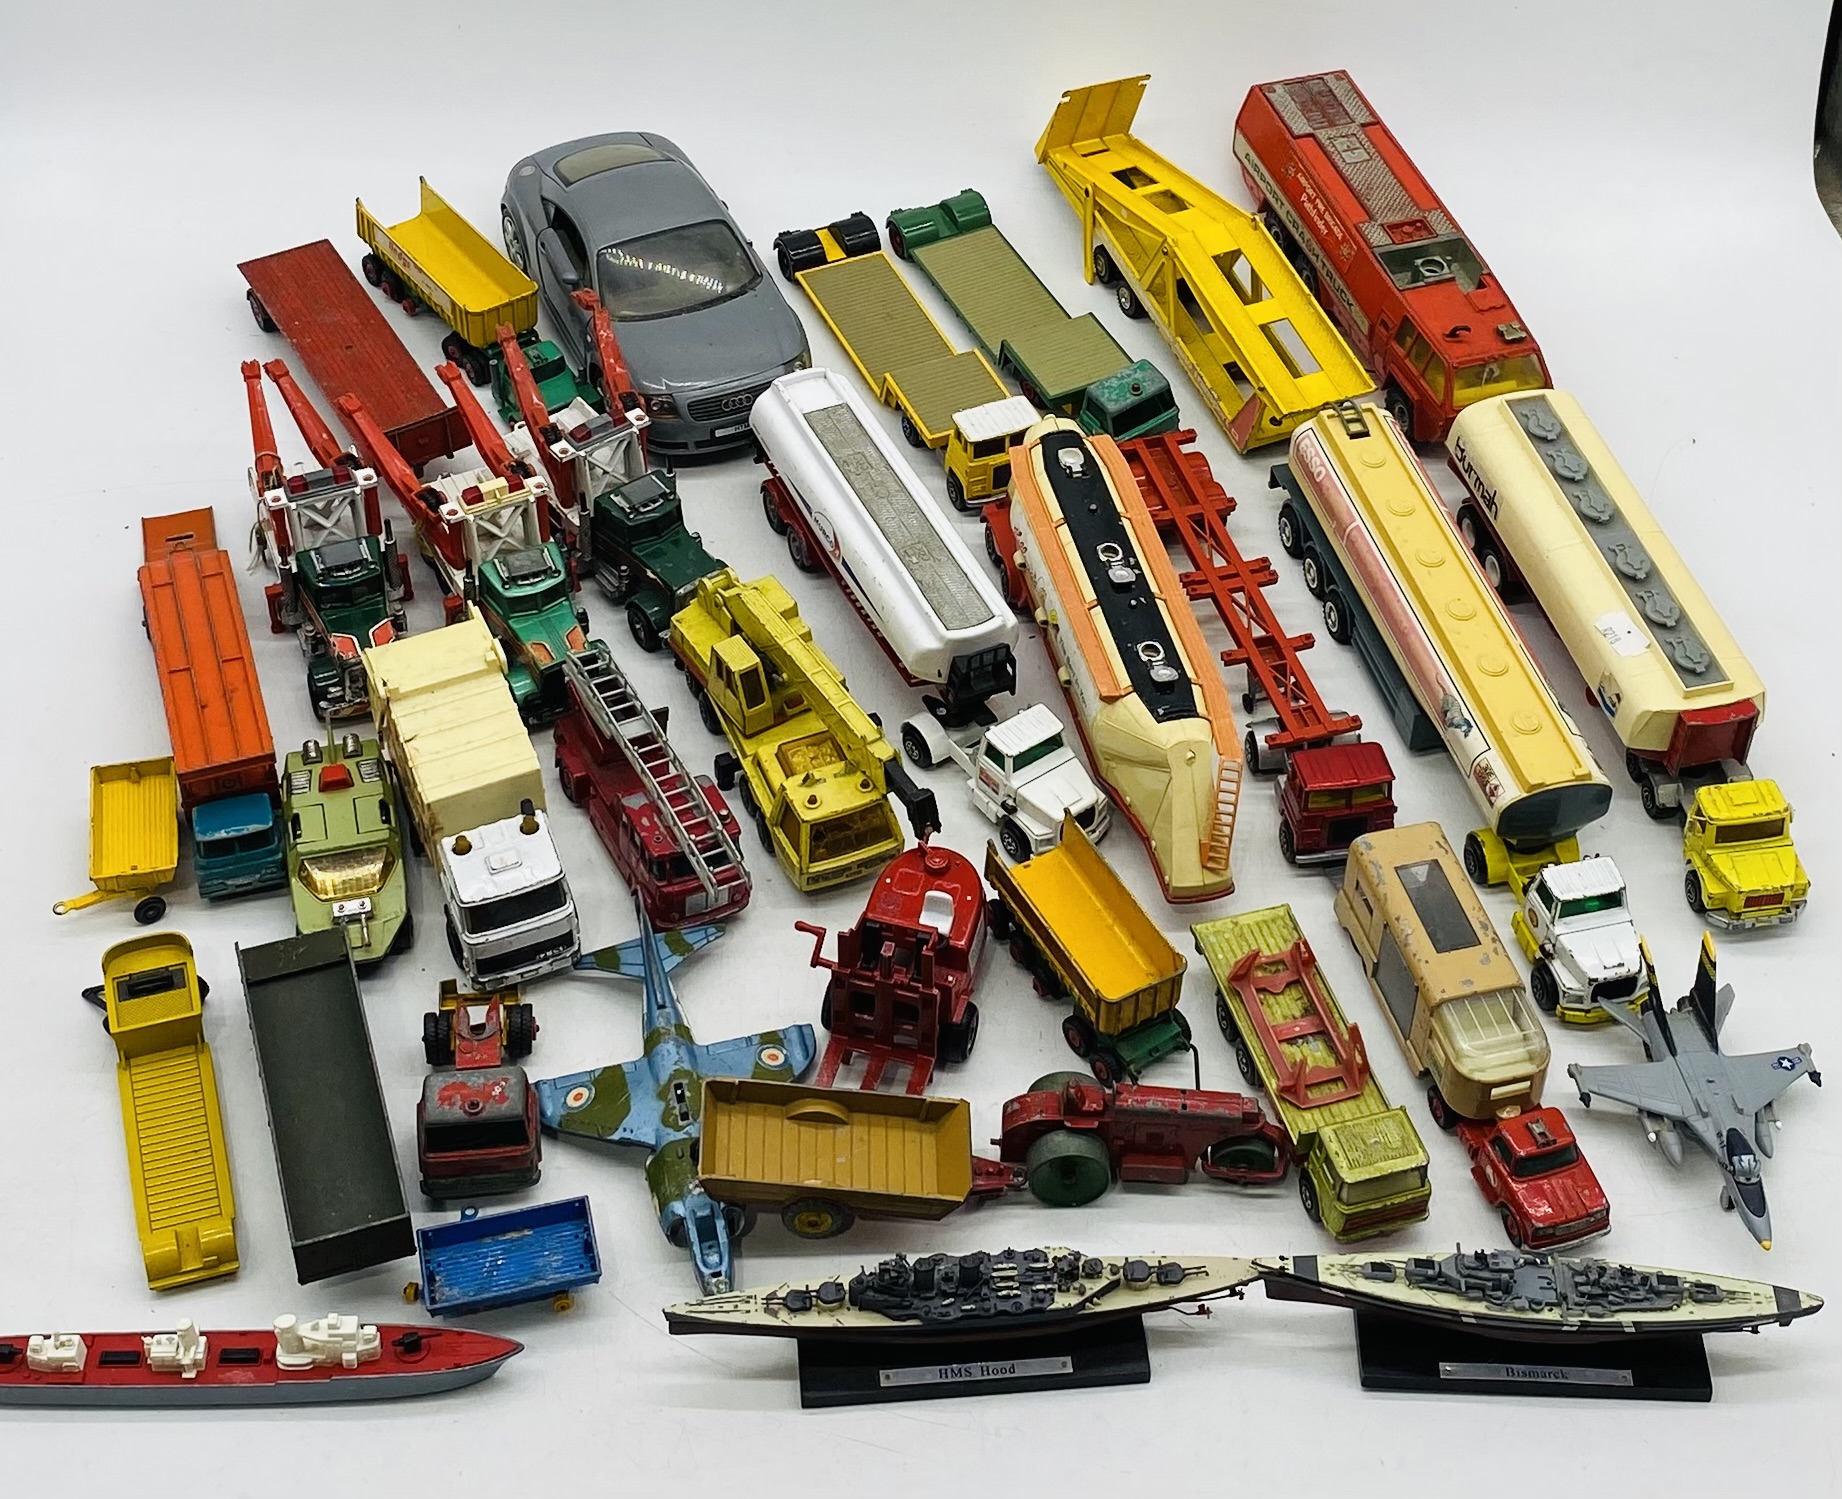 A collection of playworn die-cast vehicles including Lesney, Lone Star, Matchbox, Corgi Major etc